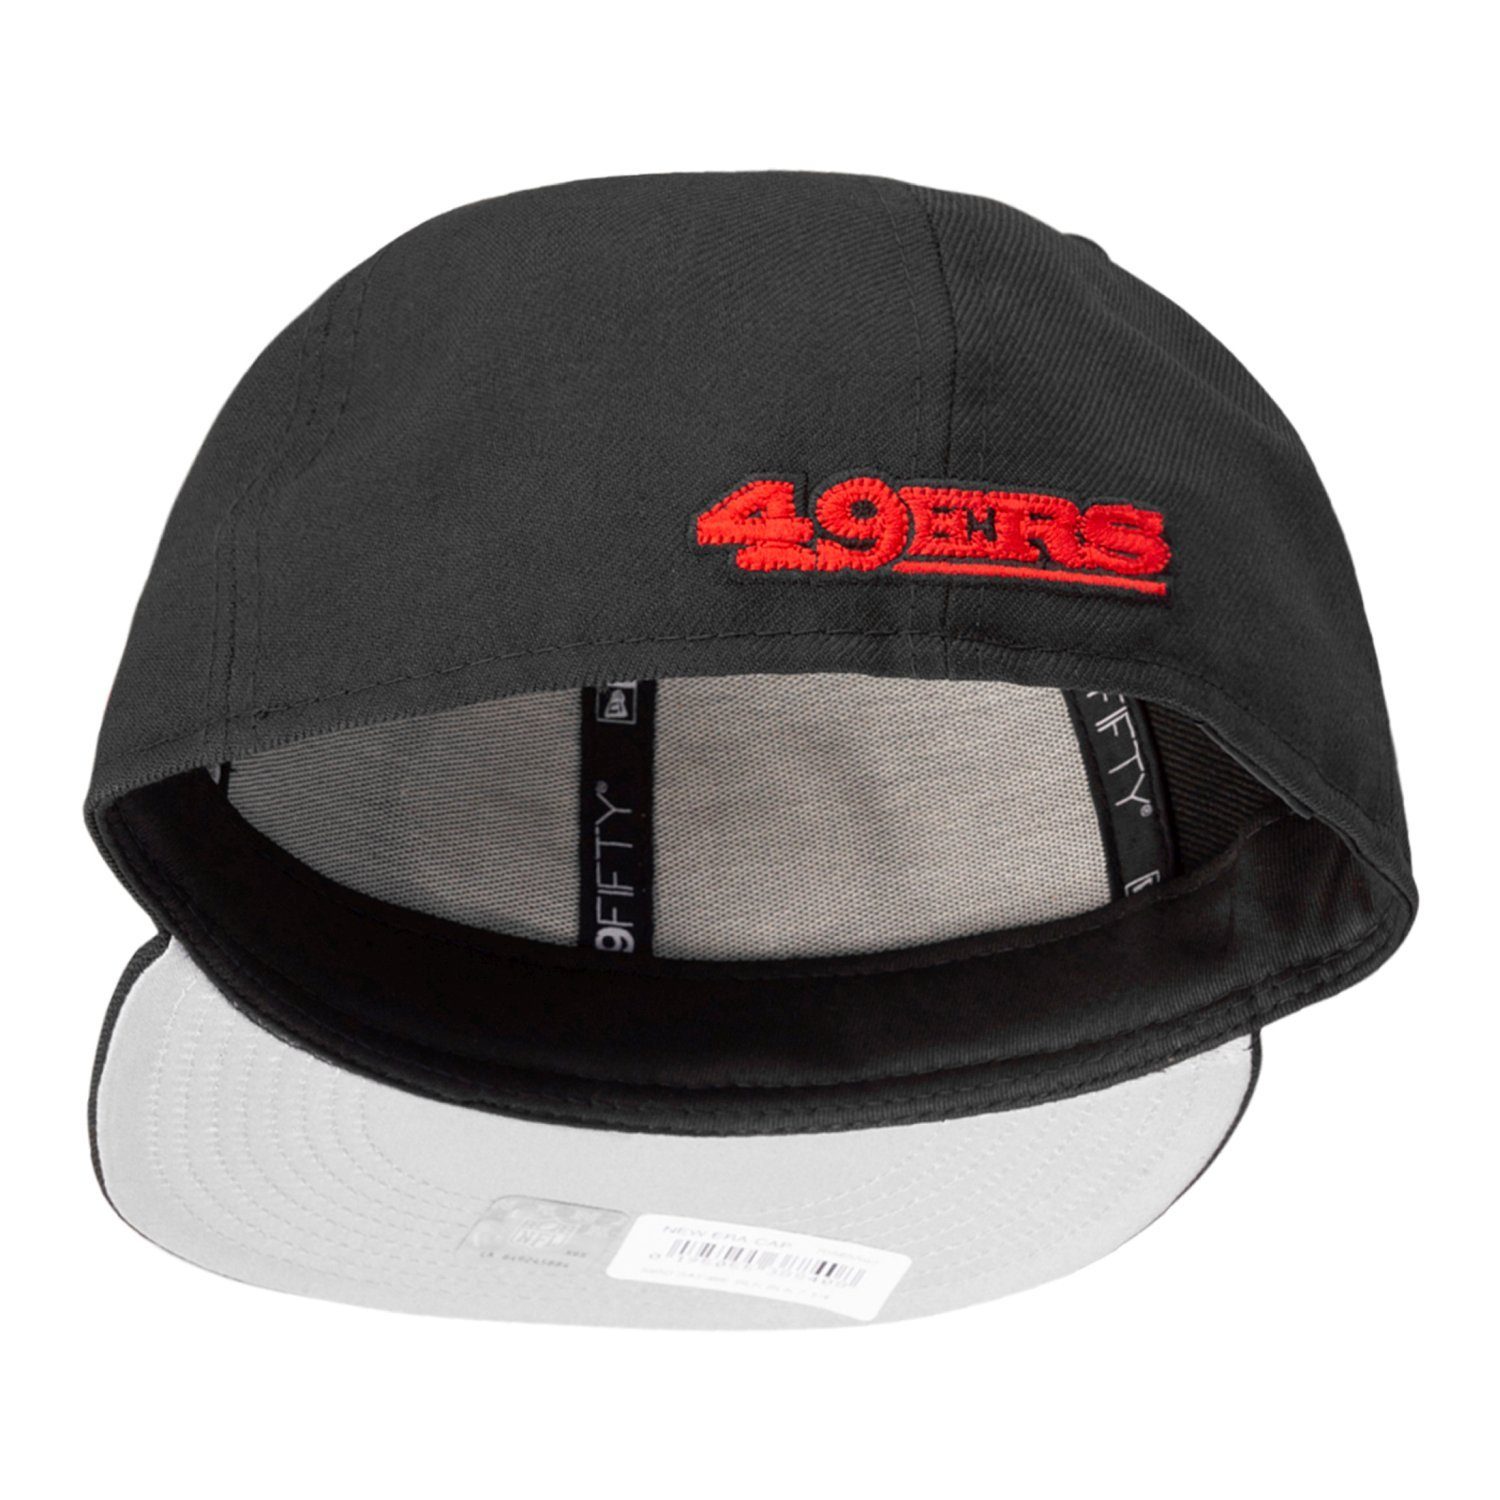 New Era Fitted Cap 49ers Francisco San 59Fifty